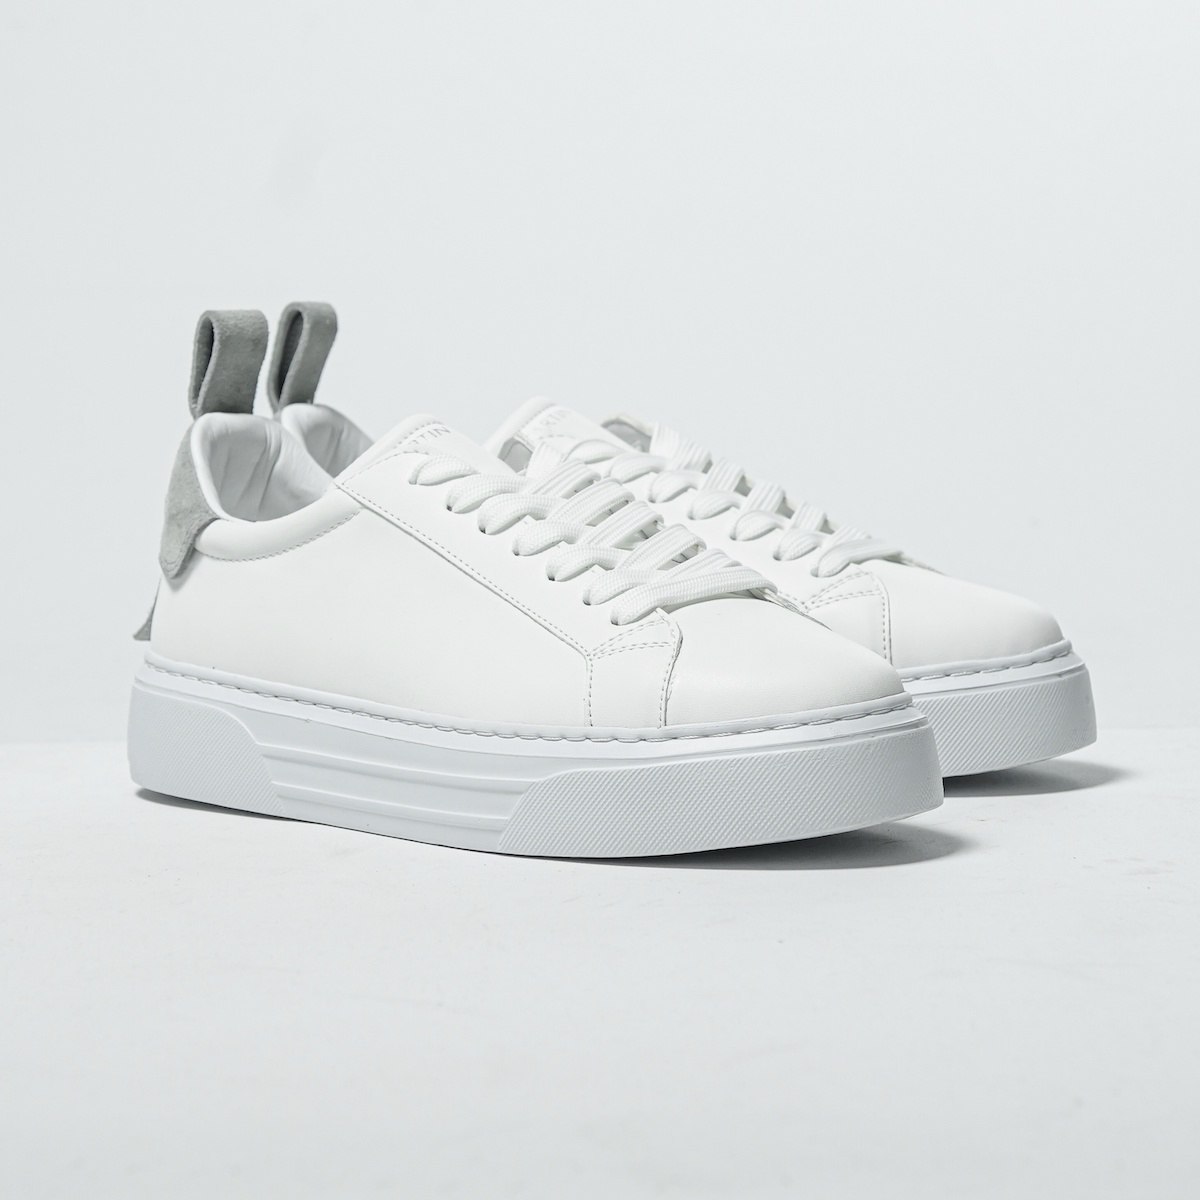 Bobe Suede Belted New Sneakers White Grey | Martin Valen